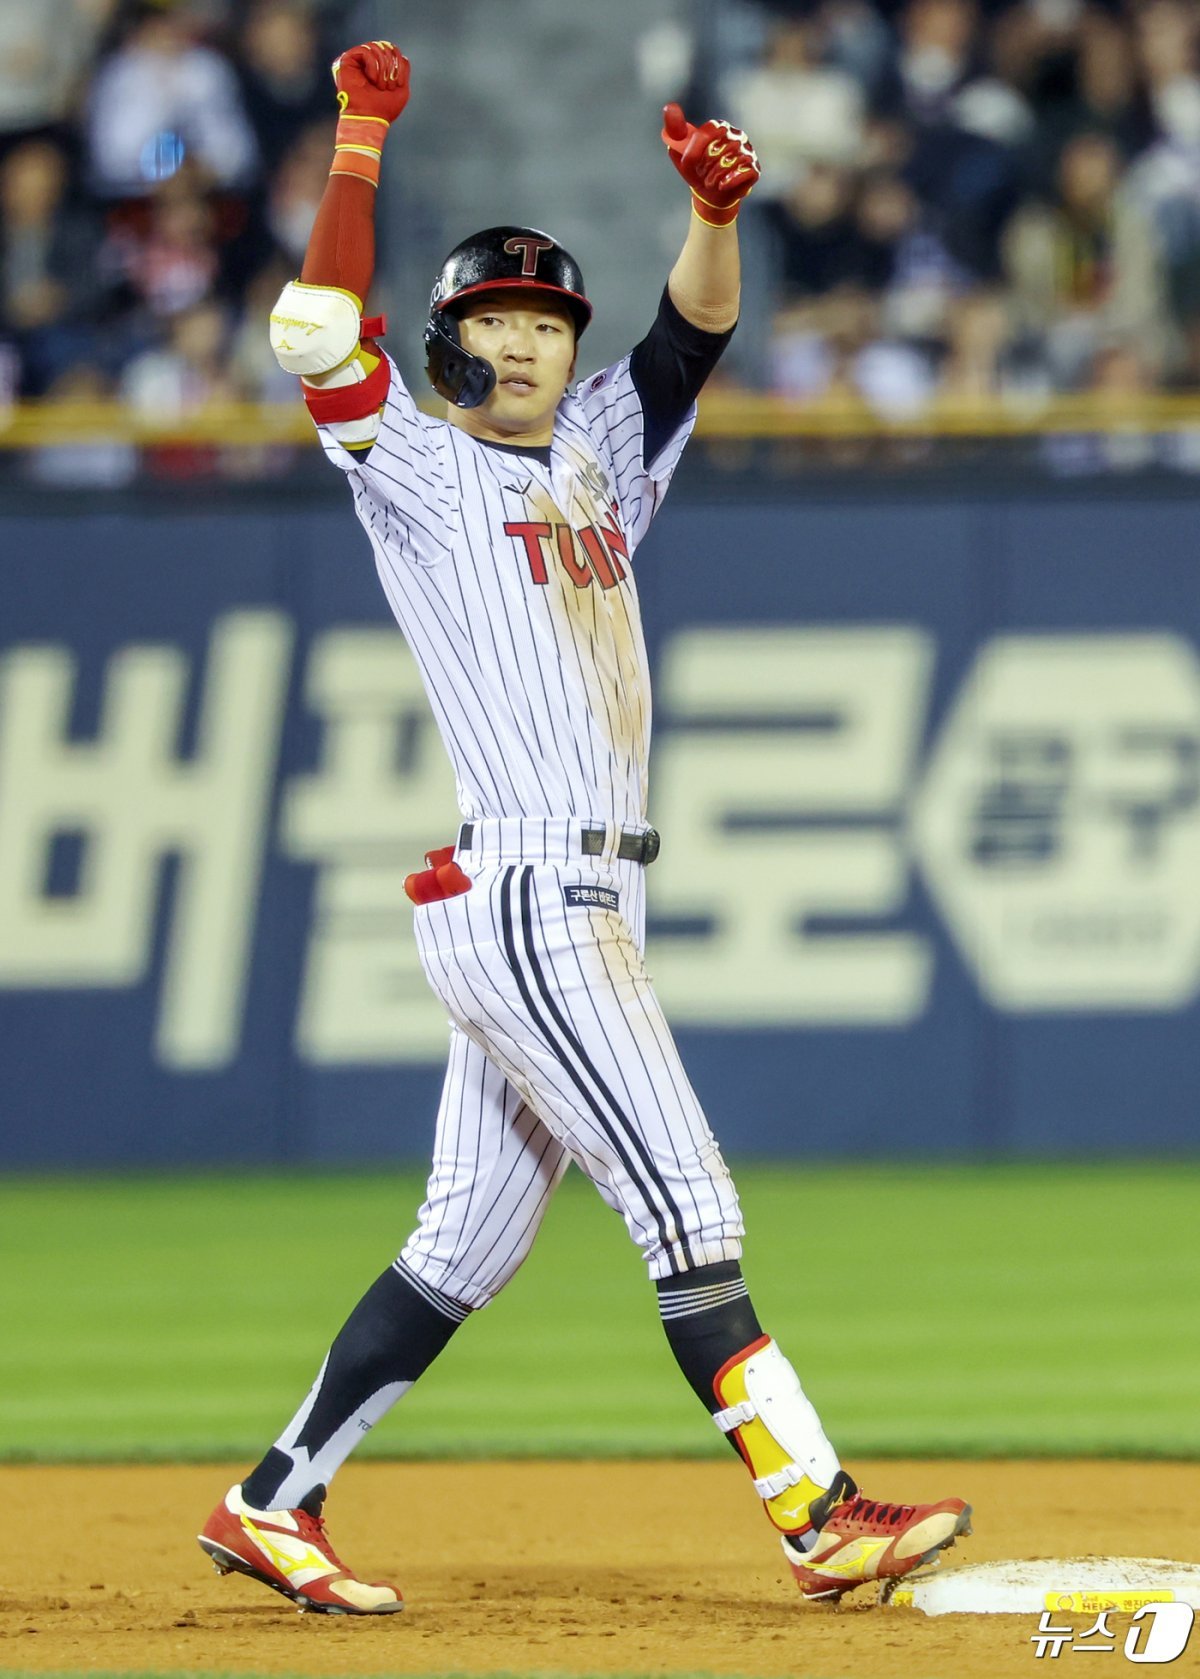 LG Park Hae-min is raising his arms at second base after hitting a hit in the 6th inning.  News 1